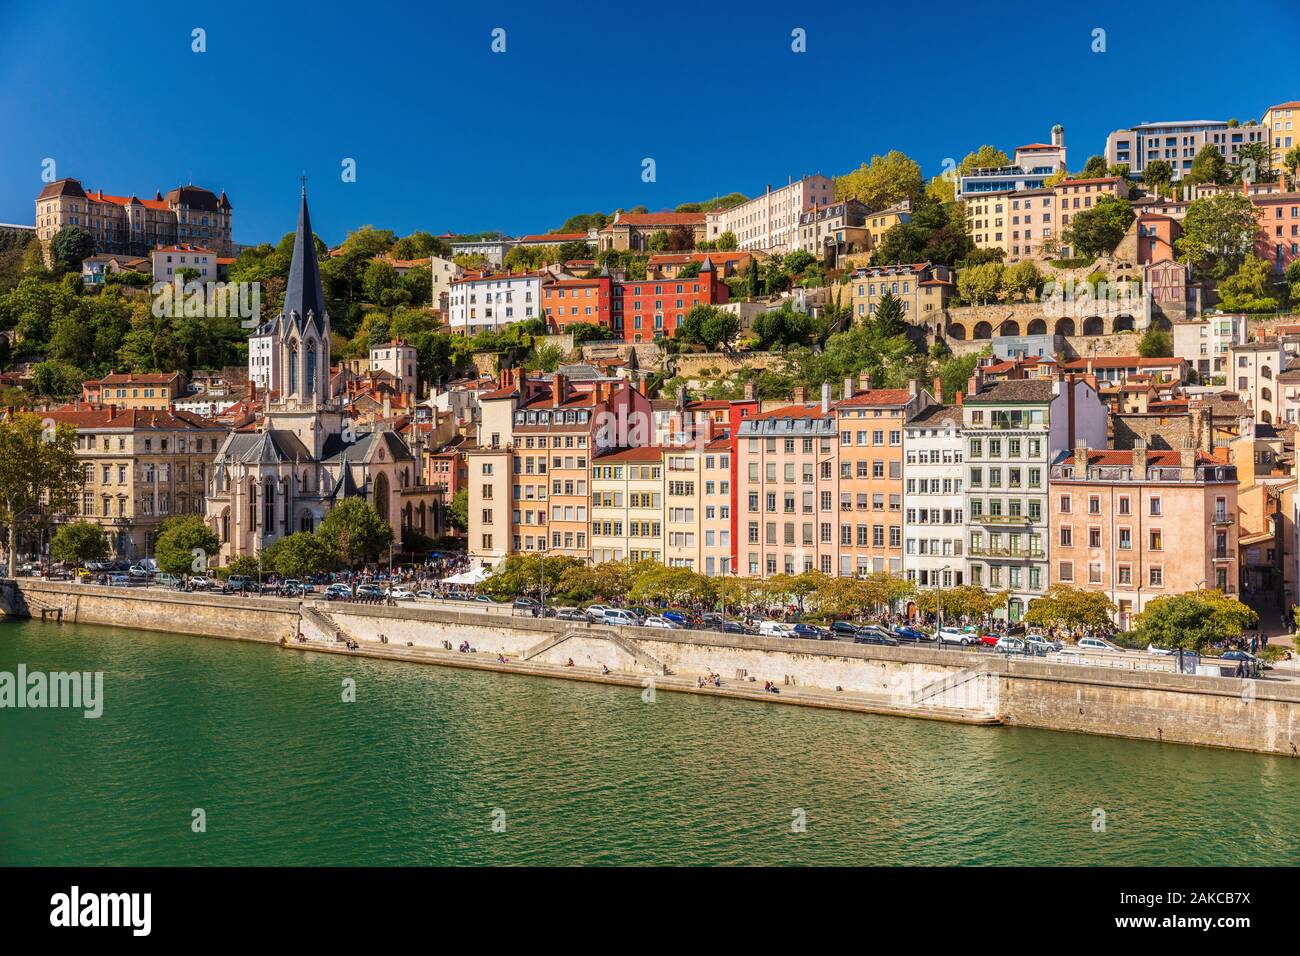 France, Rhone, Lyon, historic district listed as a UNESCO World Heritage site, Old Lyon, Quai Fulchiron on the banks of the Saone river, Saint Georges church and Saint-Just College on Fourviere hill Stock Photo